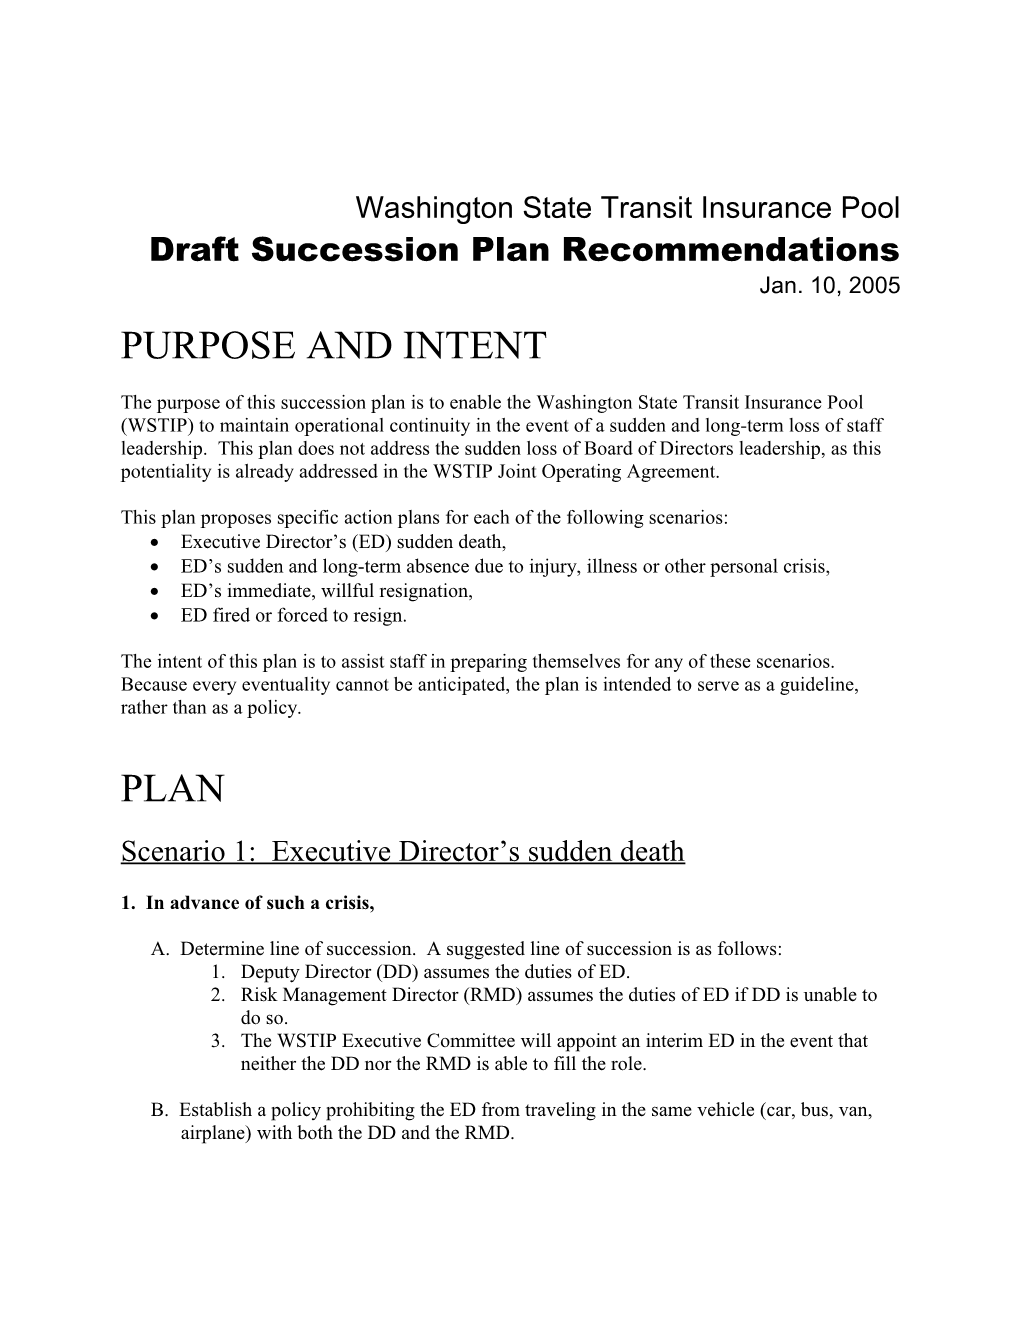 The Purpose of This Succession Plan Is to Enable the Washington State Transit Insurance